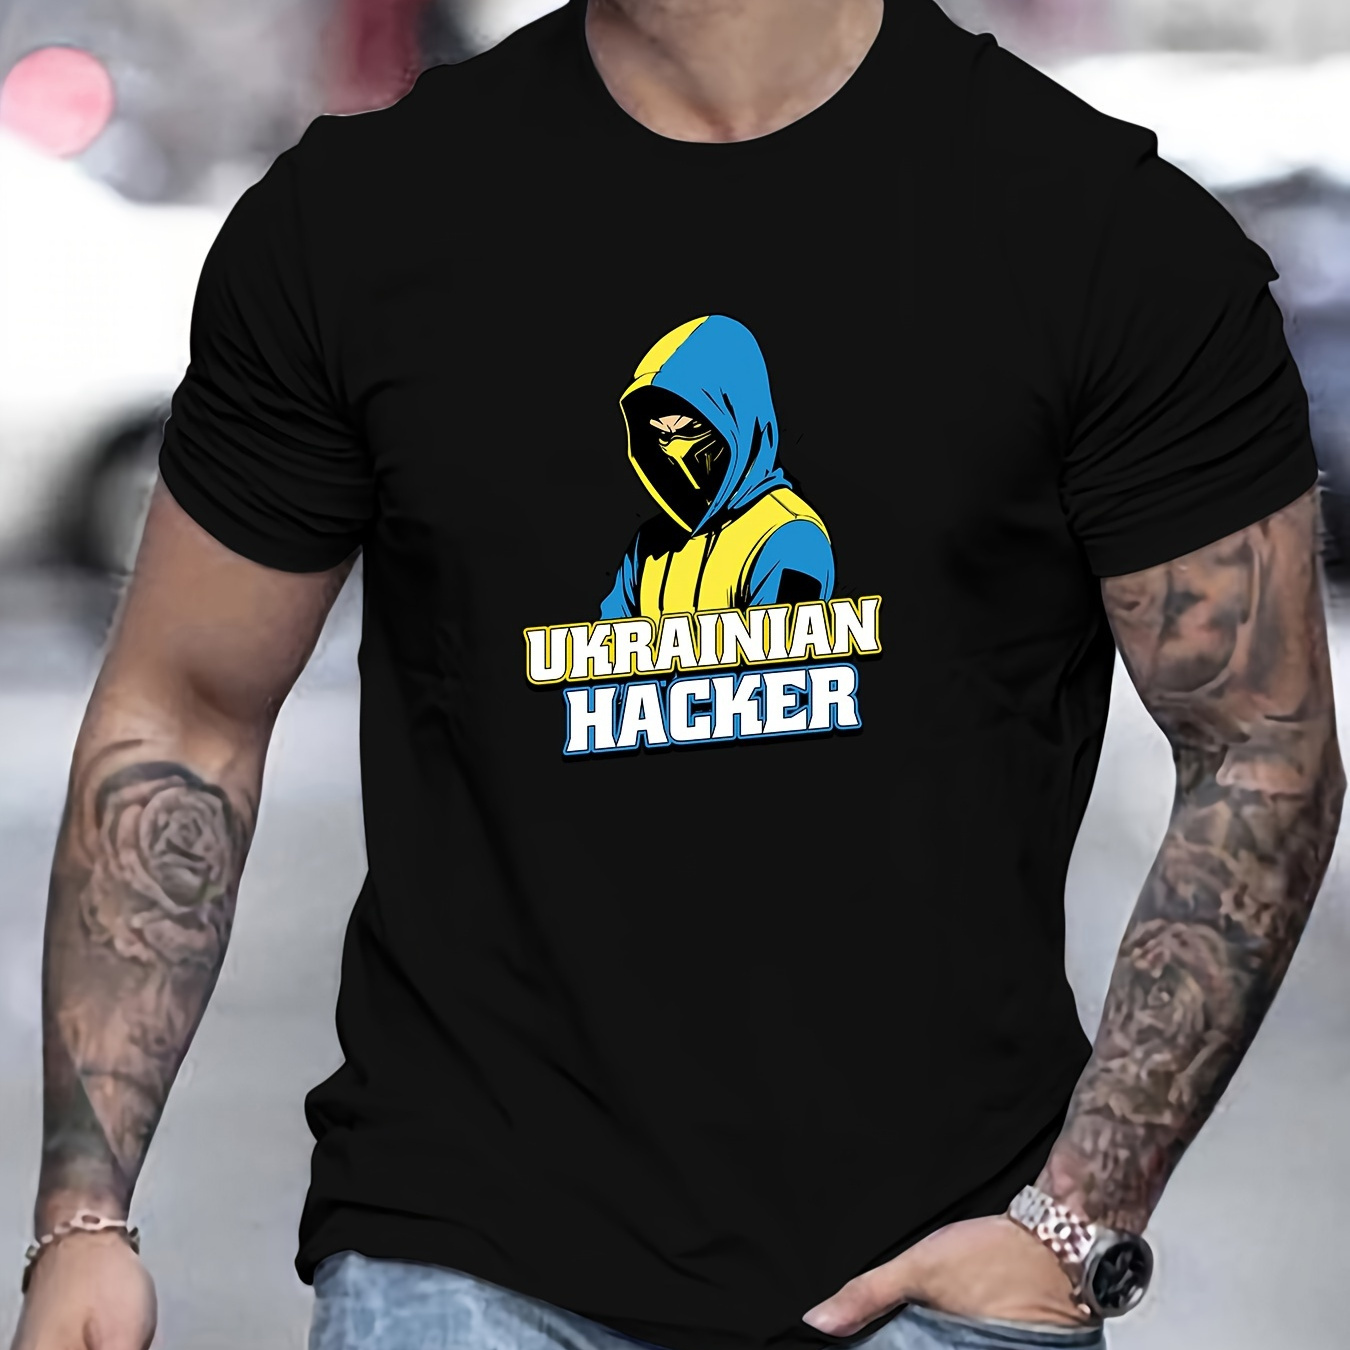 

Ukrainian Hacker Pattern Print Crew Neck Short Sleeve T-shirt For Men, Comfy Casual Summer T-shirt For Daily Wear Work Out And Vacation Resorts